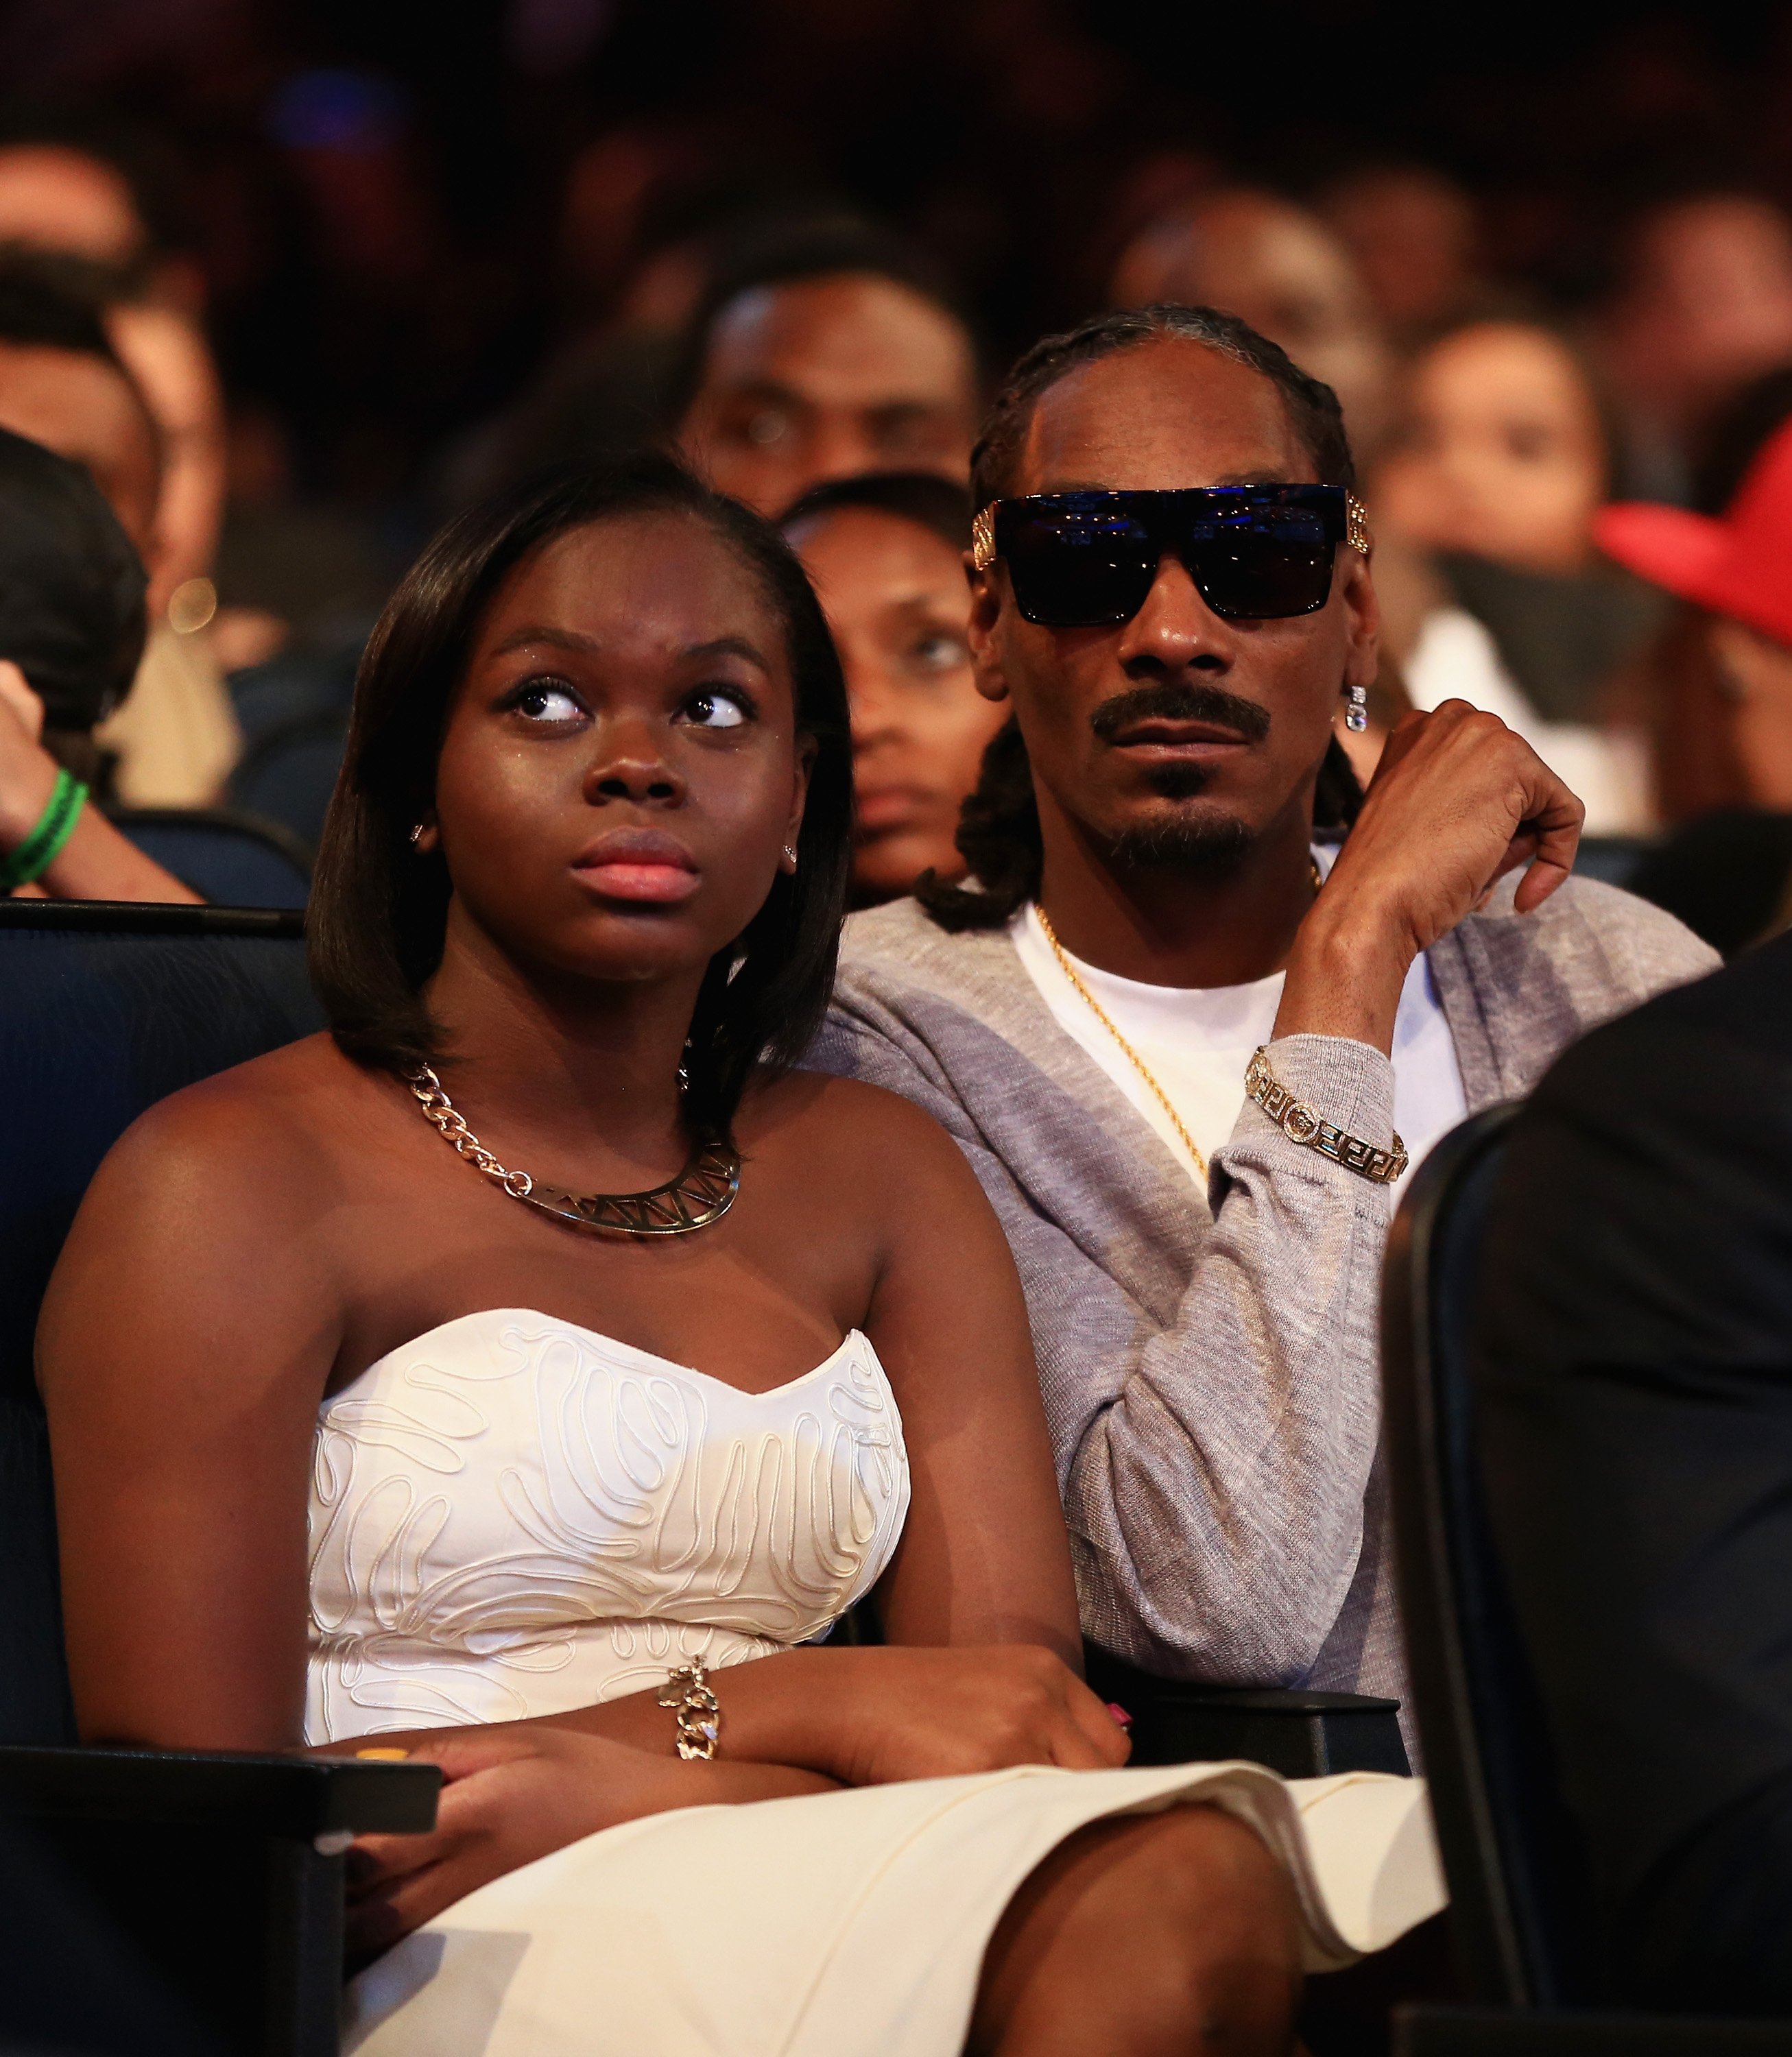 Snoop Dogg & Cori Broadus at the BET AWARDS on June 29, 2014 in California | Photo: Getty Images/GlobalImagesUkraine